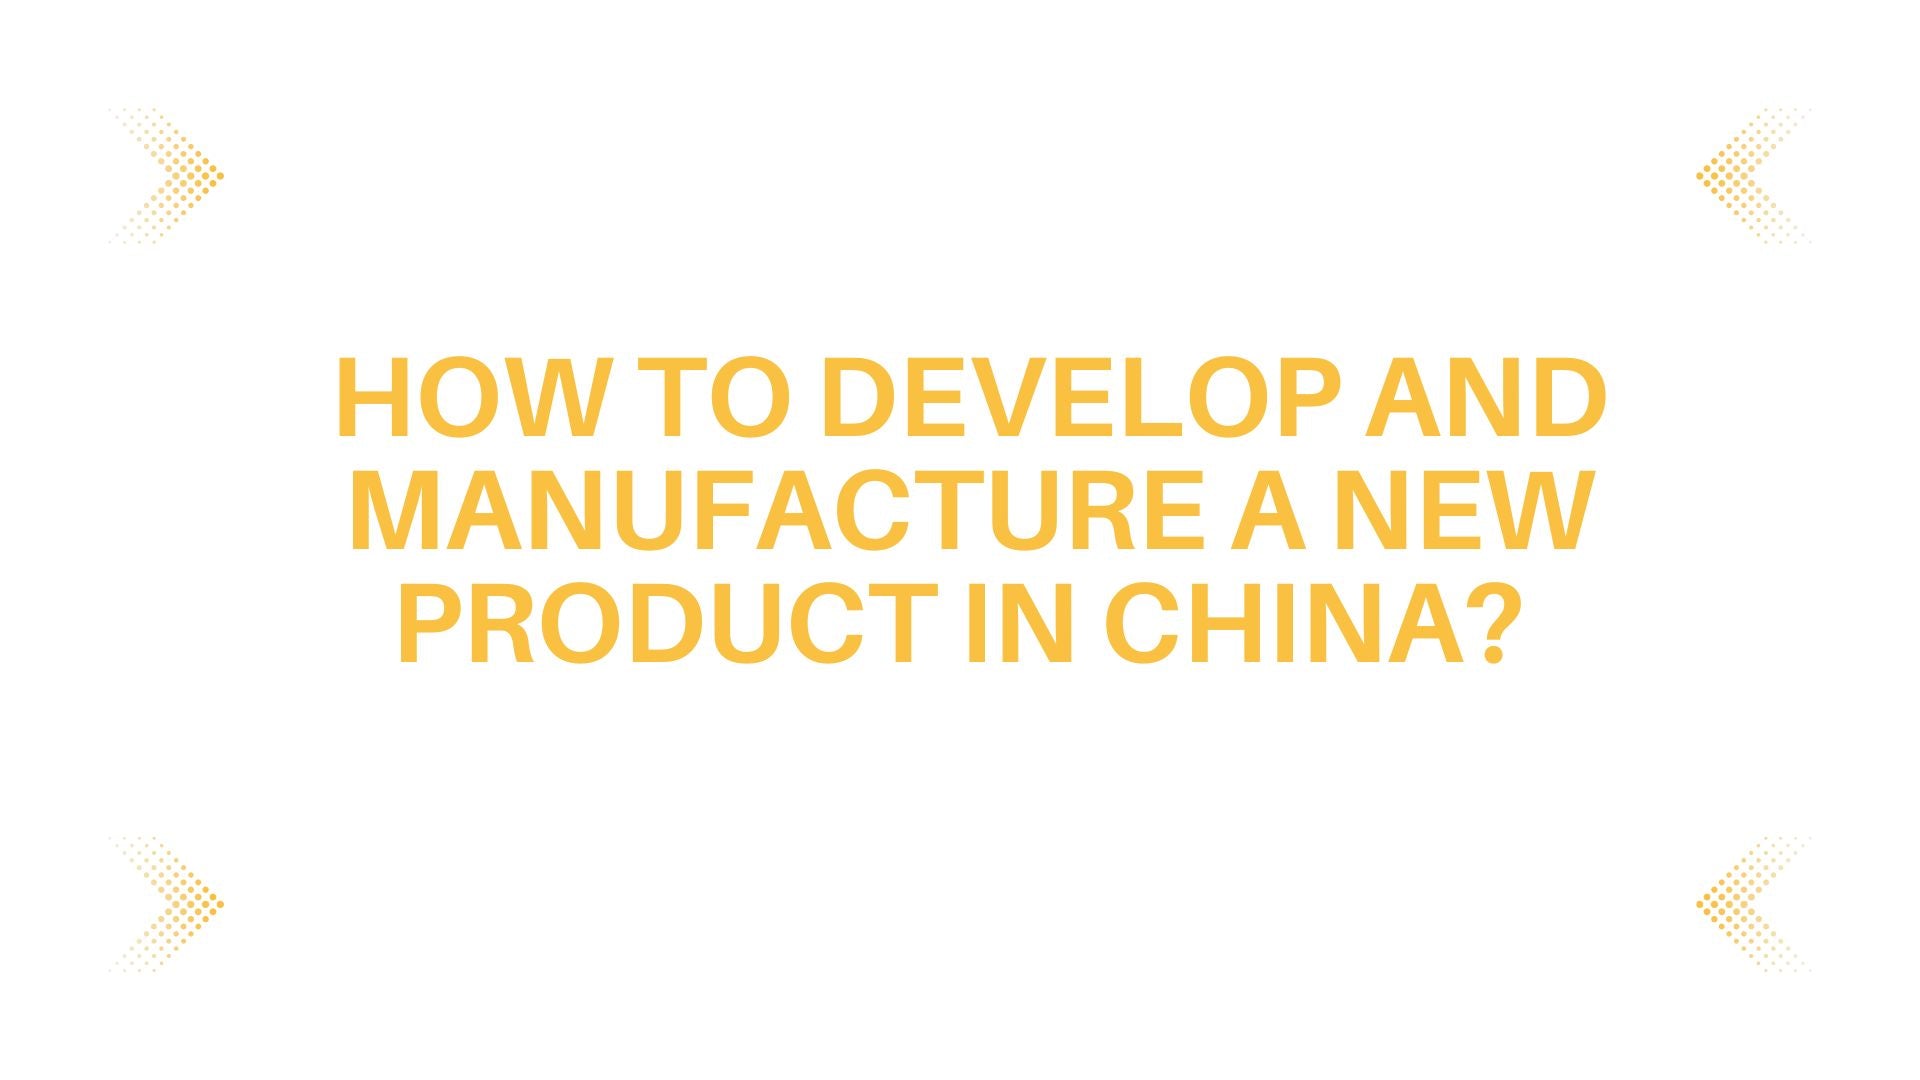 How to Develop and Manufacture a New Product in China?